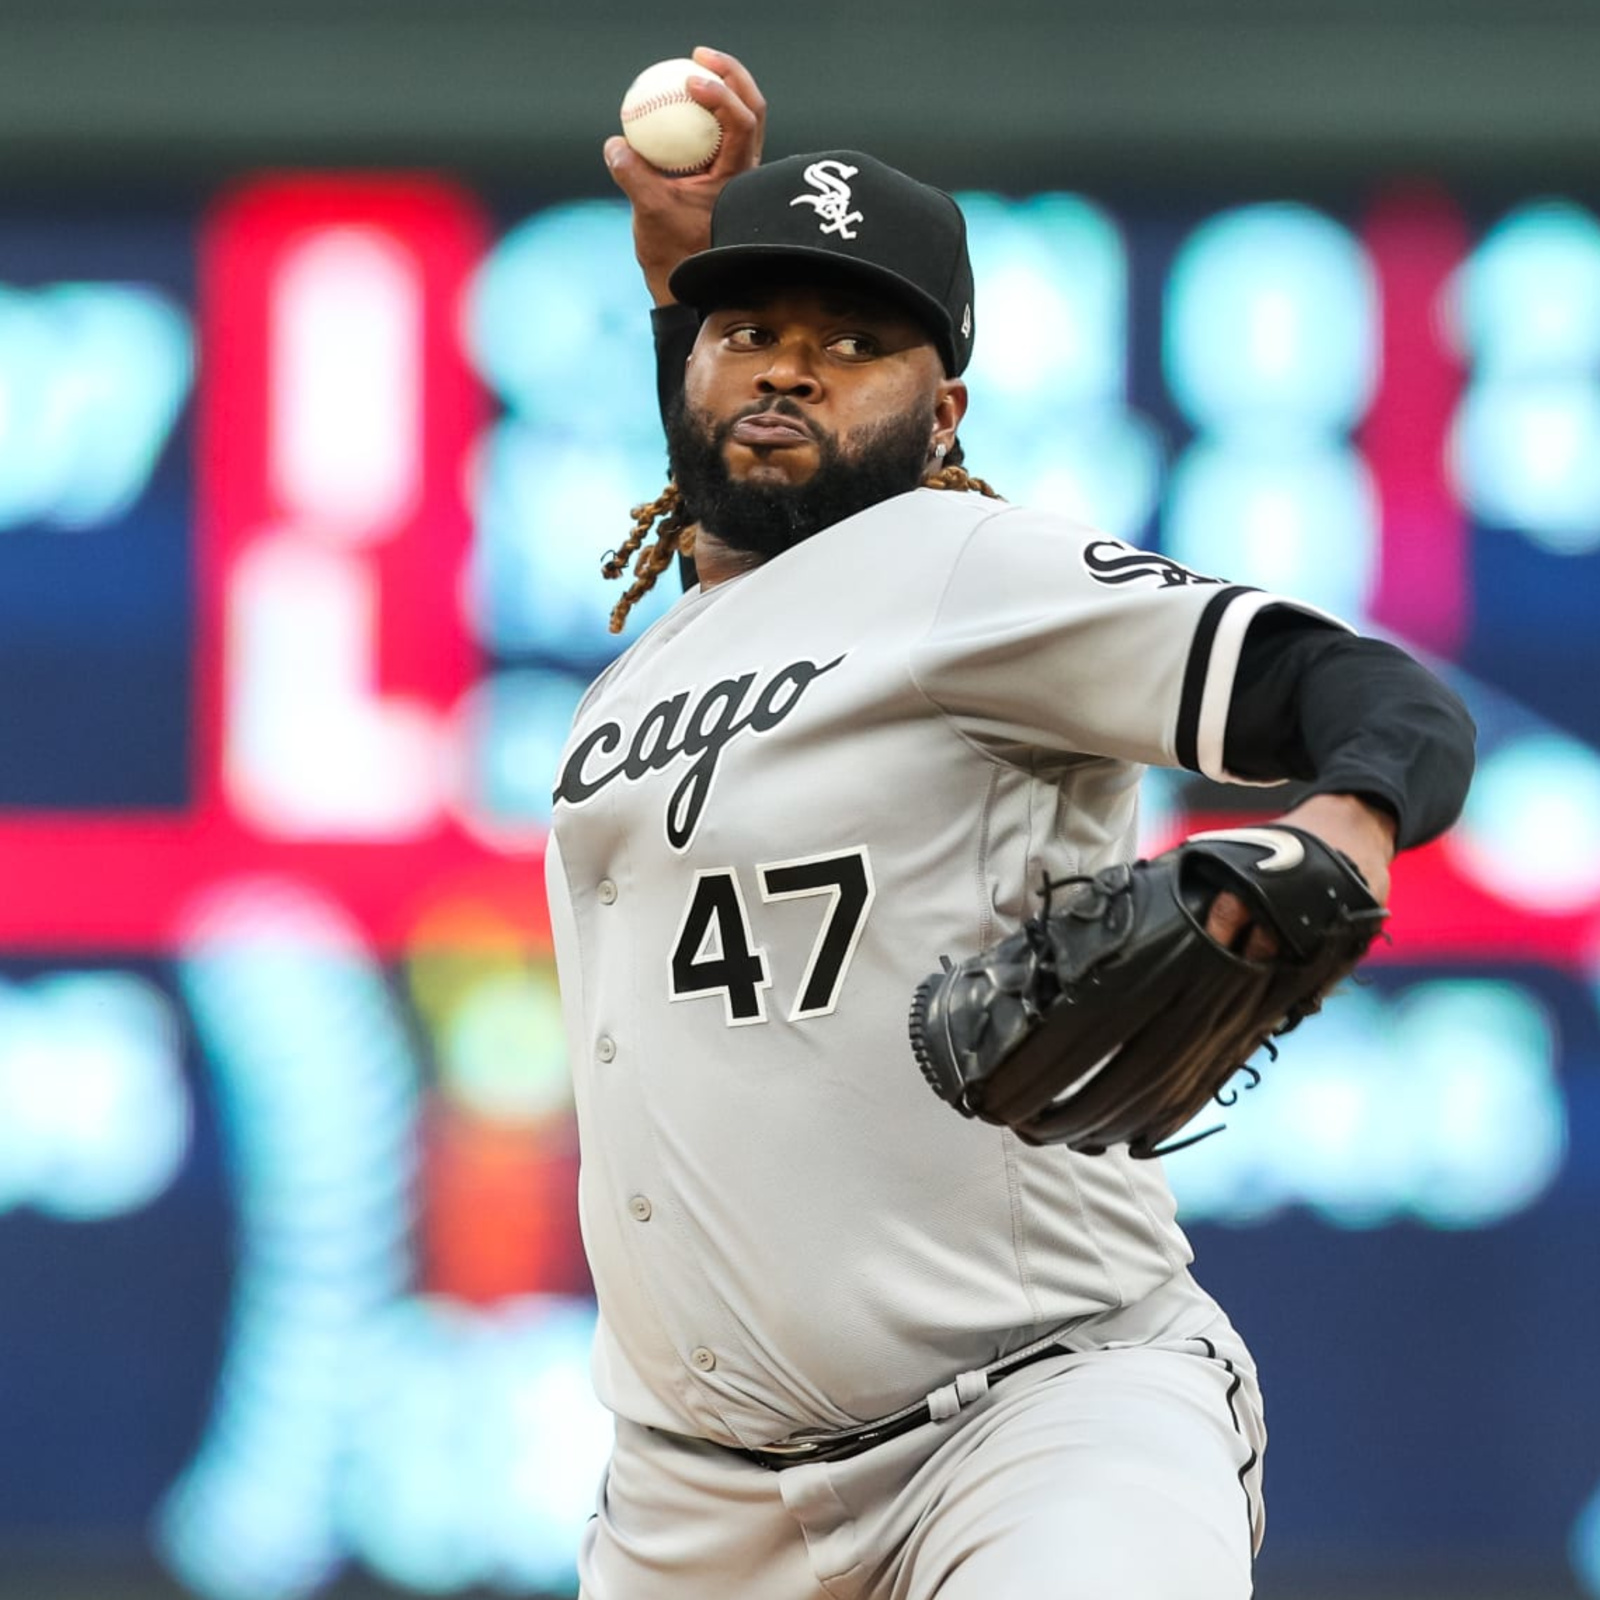 Johnny Cueto chooses Marlins over Padres in free agency - Gaslamp Ball